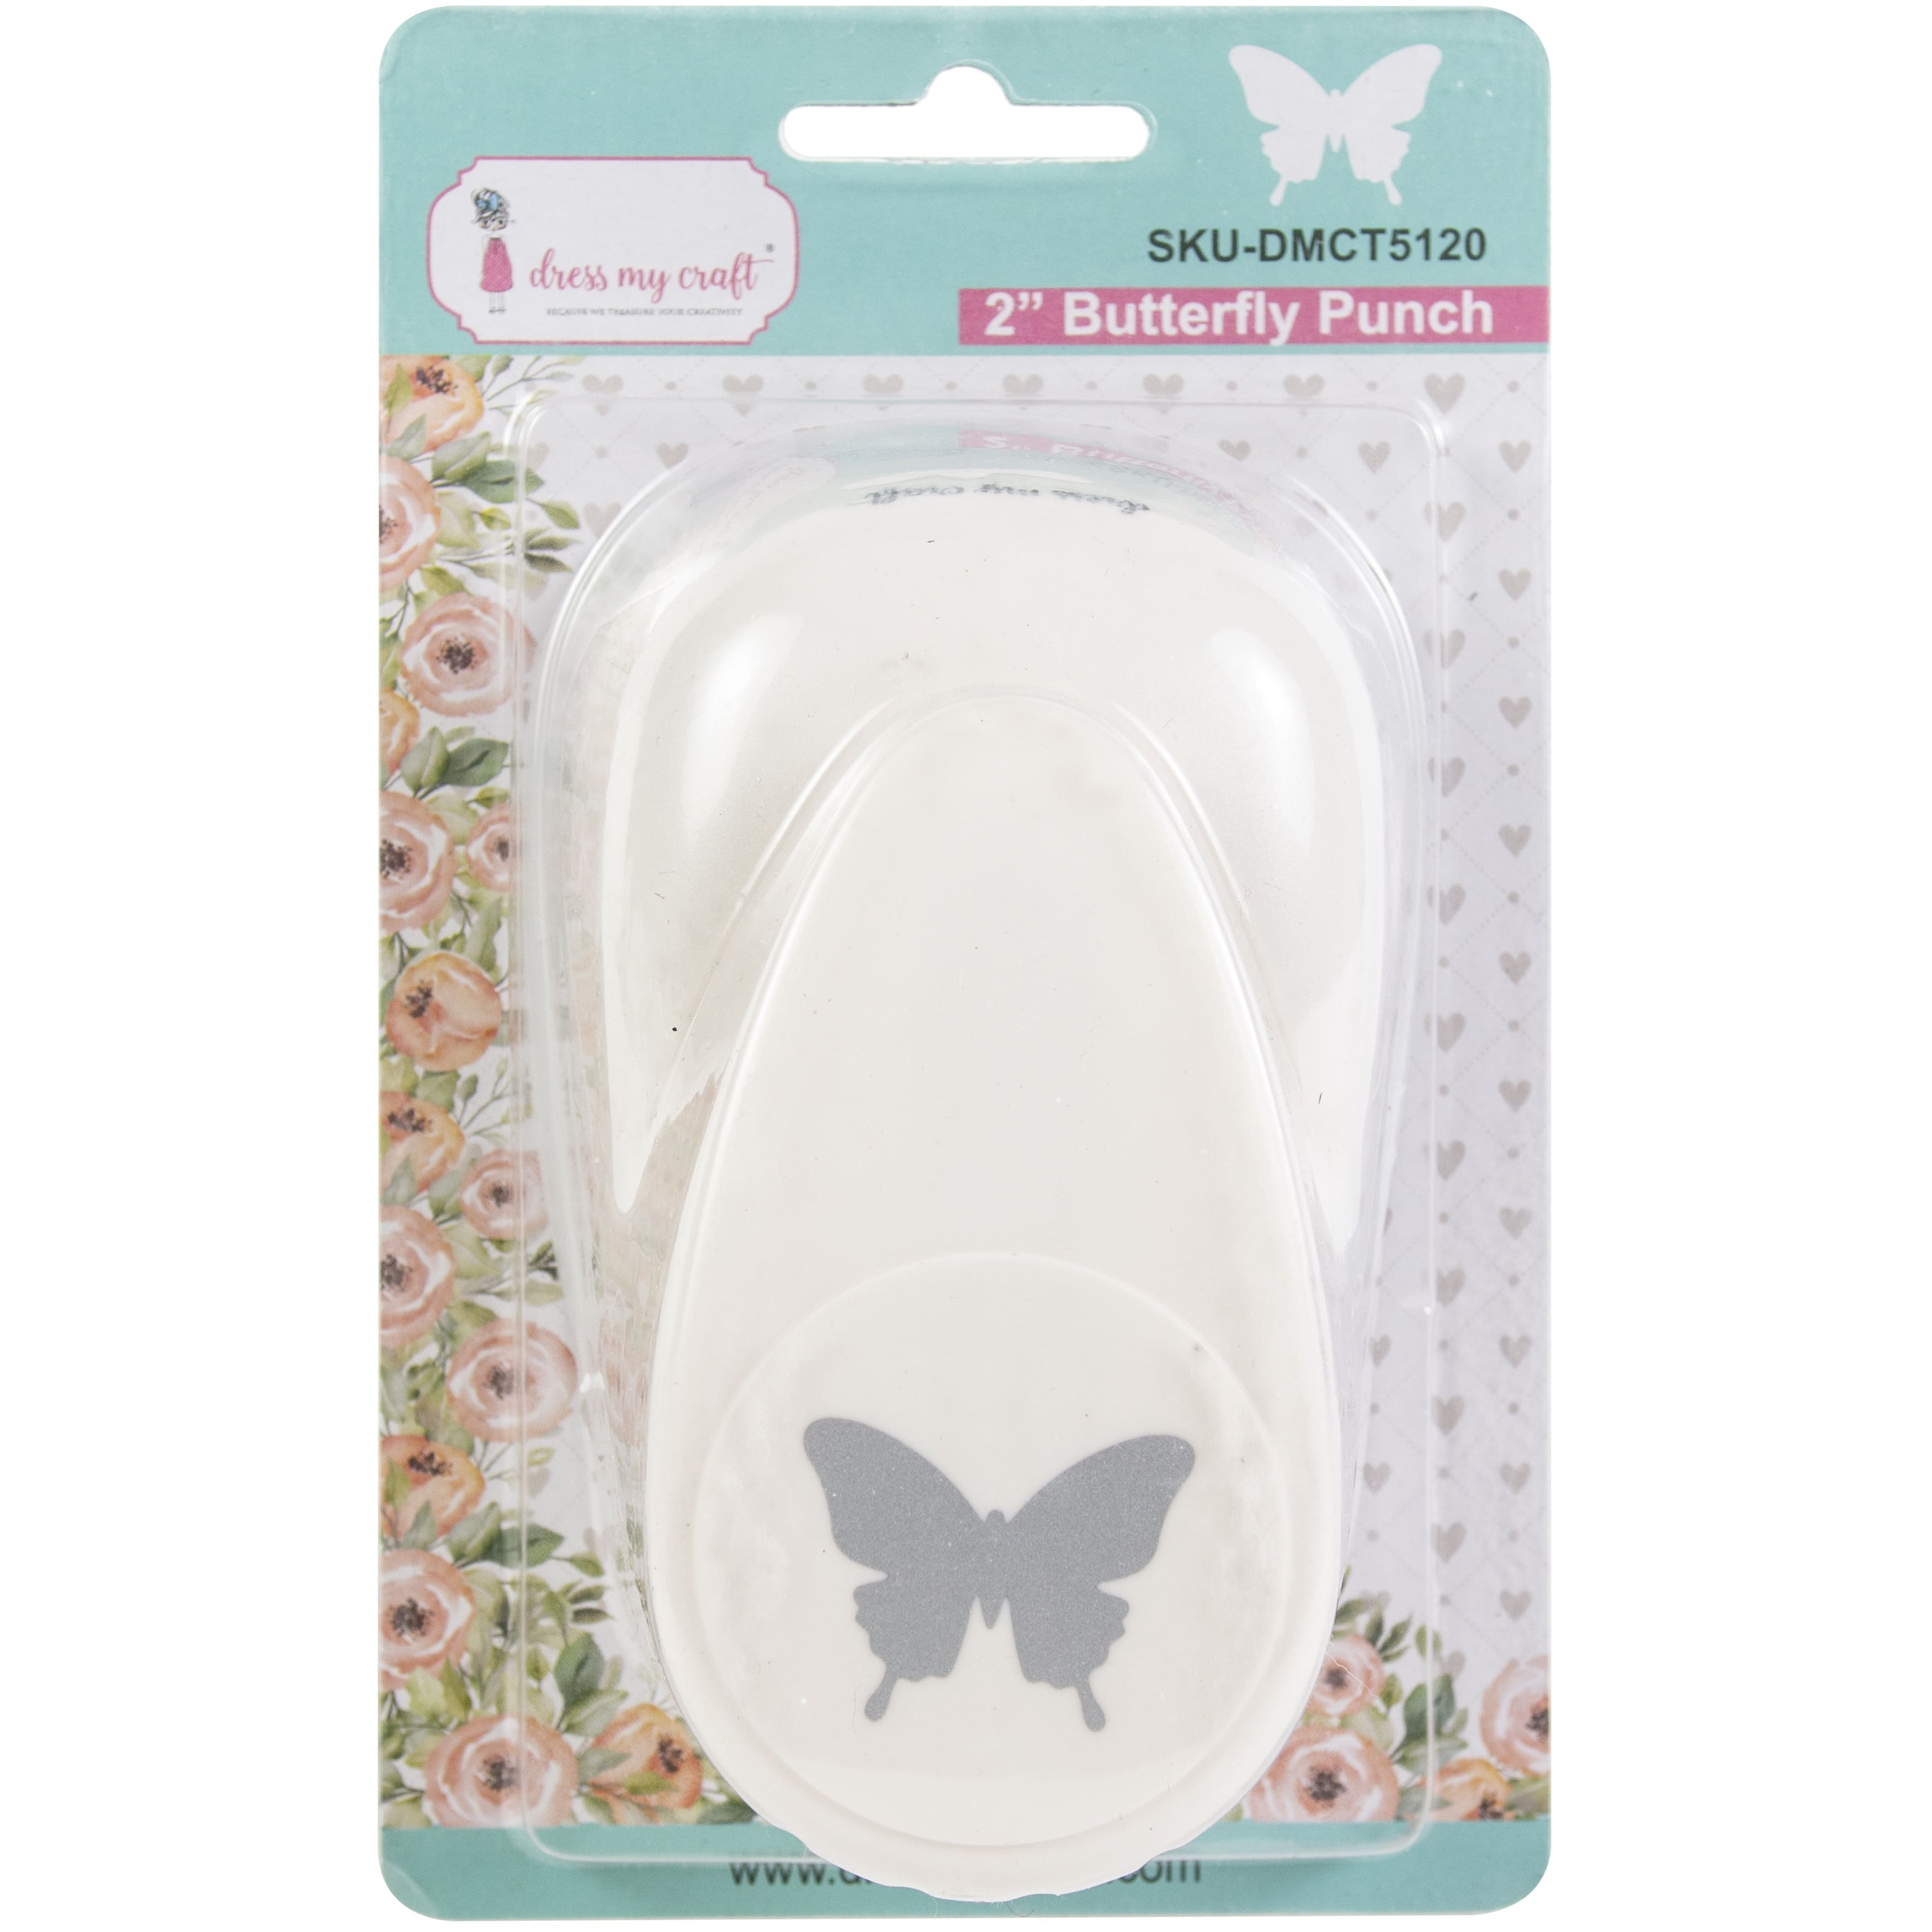 A Butterfly punched out from Design Paper on a Manilla Tag